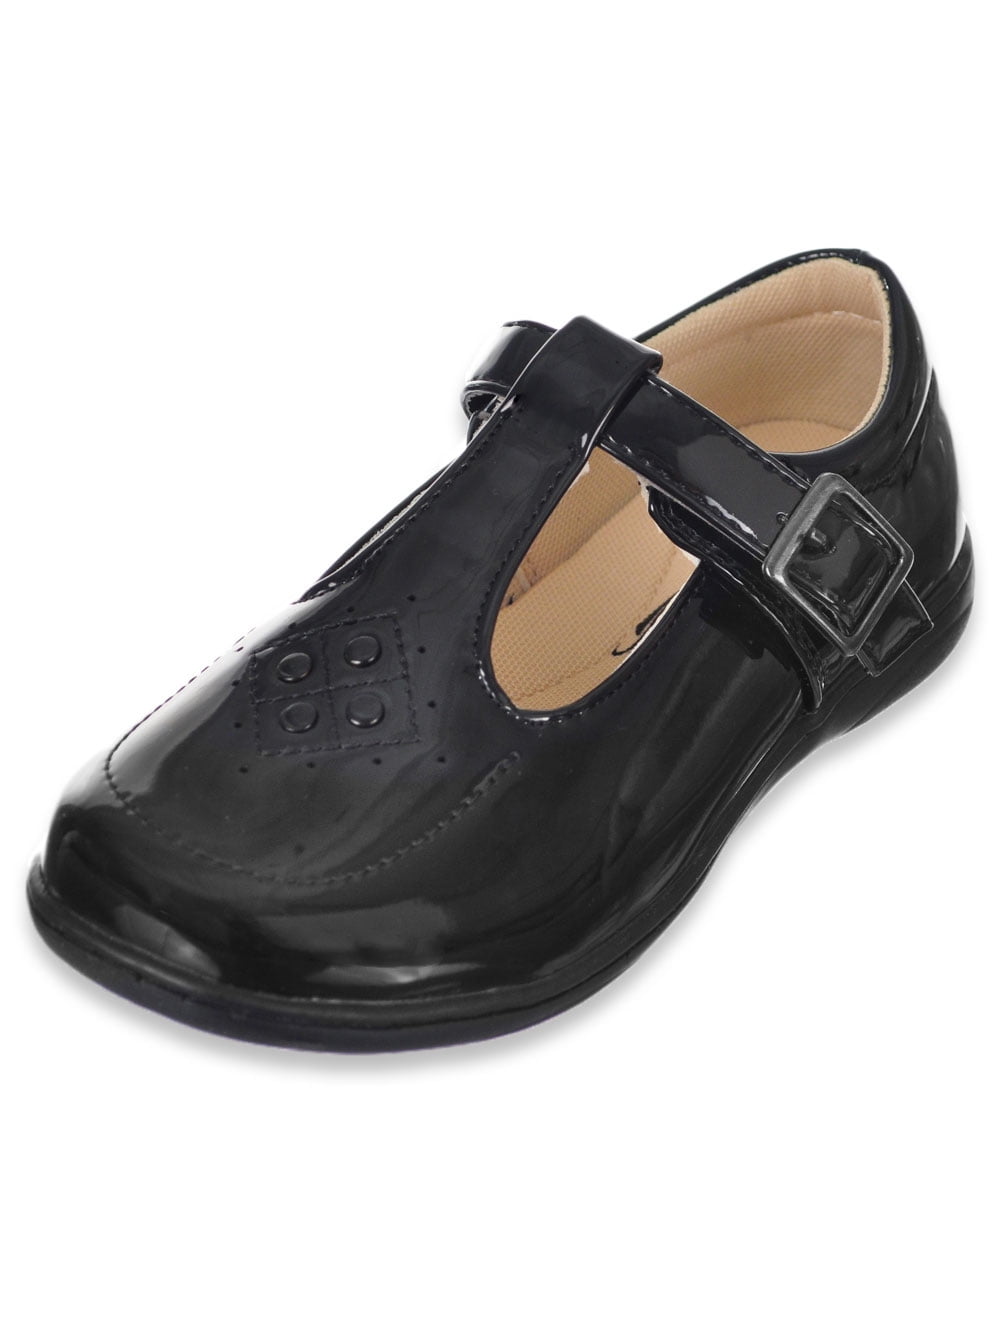 Girls Black Patent School Shoes Kids T Bar Mary Jane Touch Strap Size 6-12 